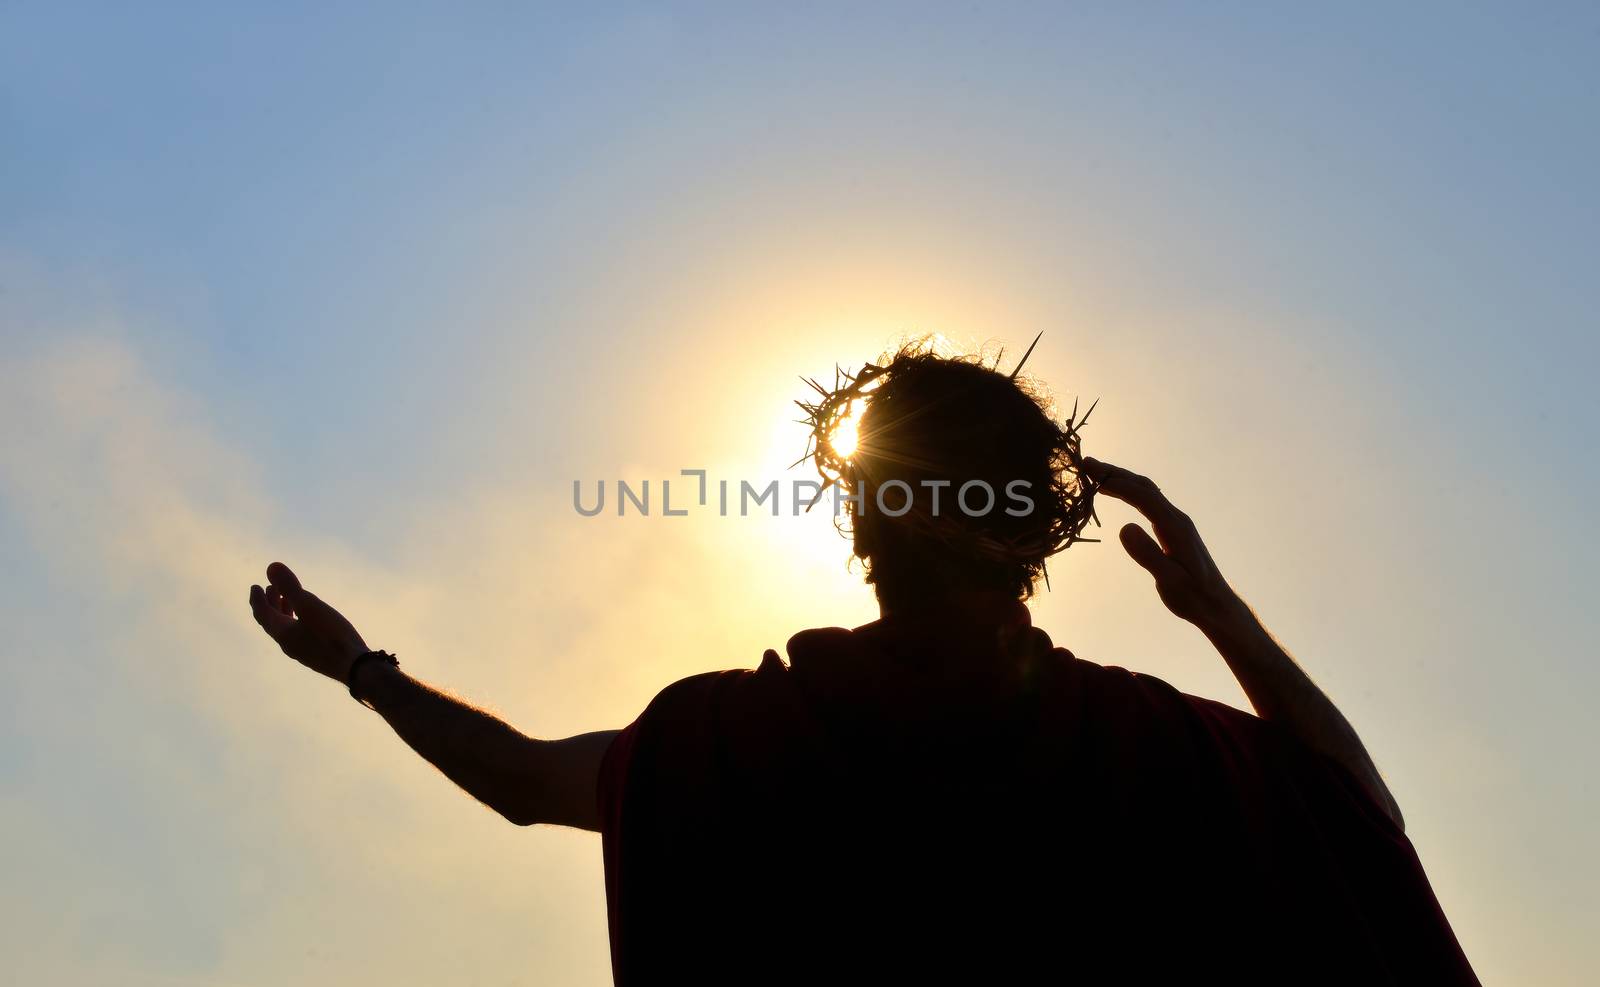 Jesus Christ with crown of thorns by jordachelr